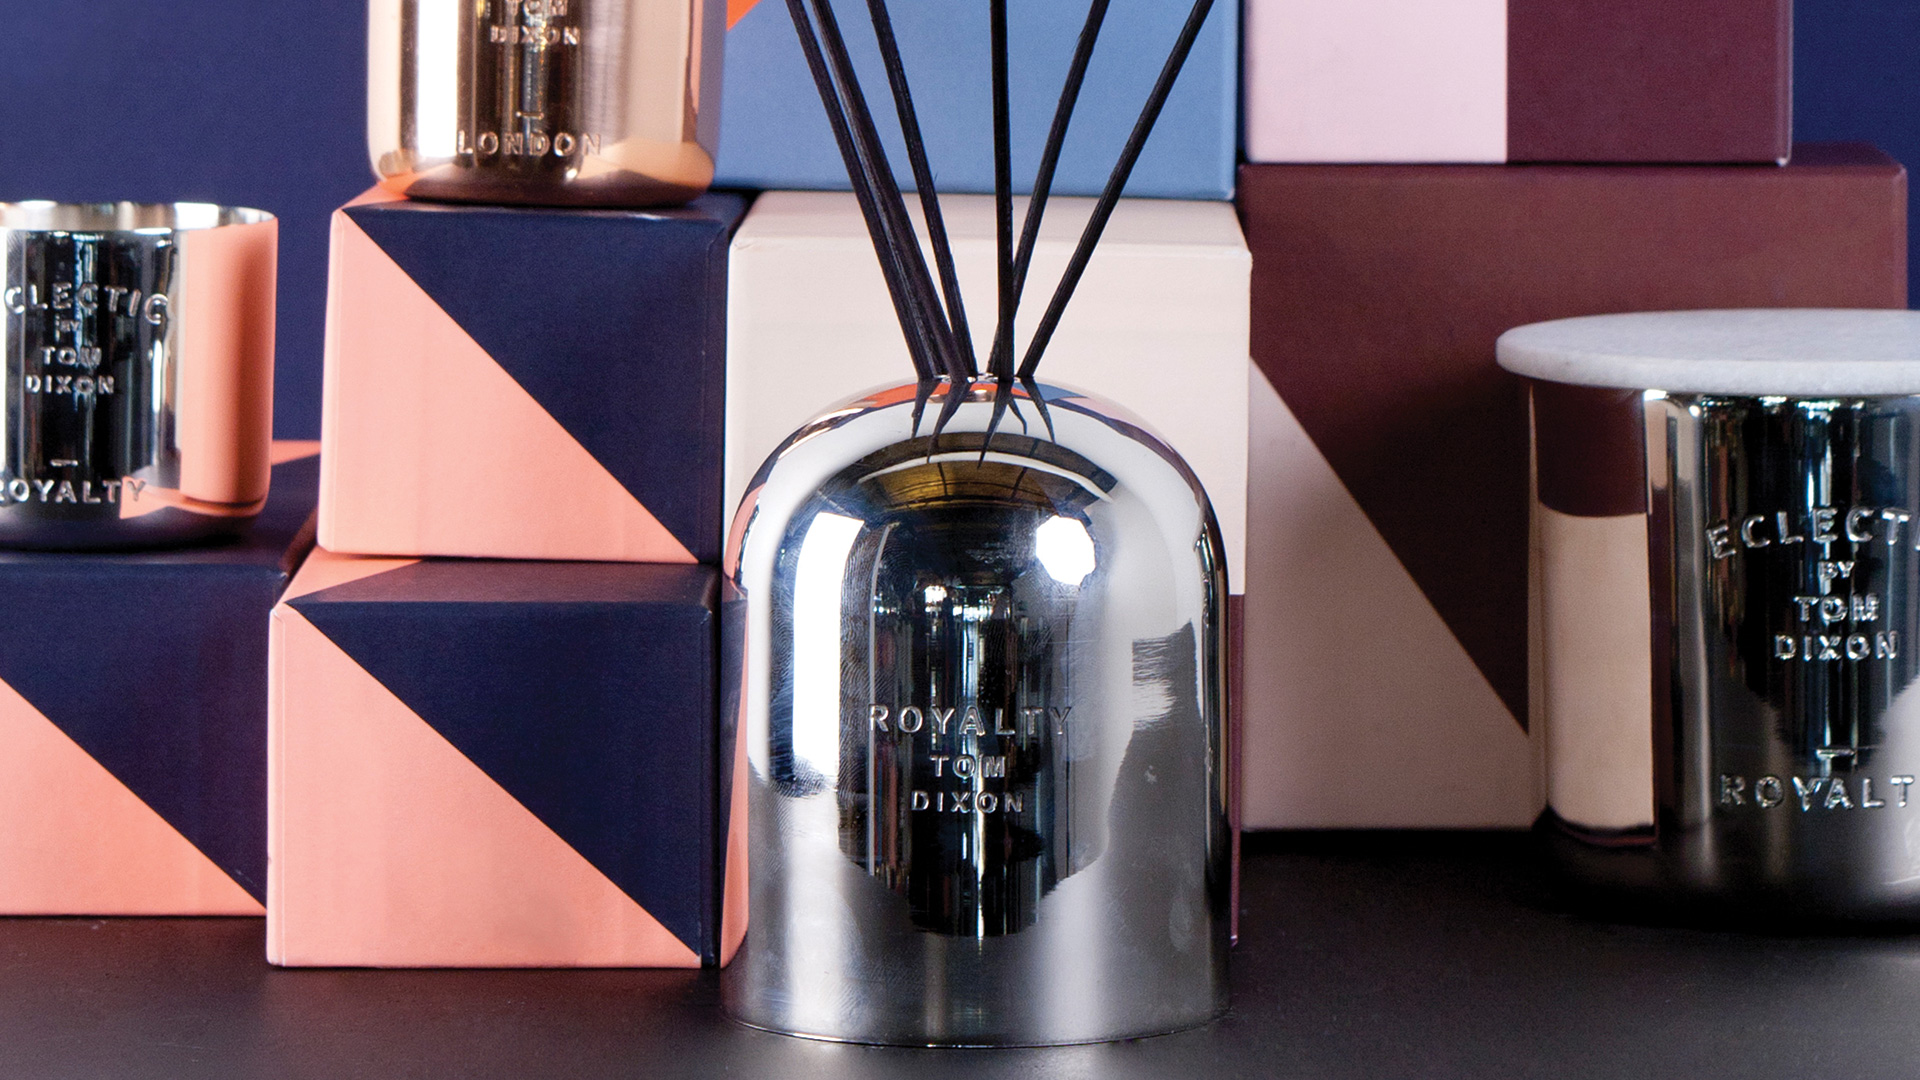 Eclectic Royalty Diffuser, Lifestyle